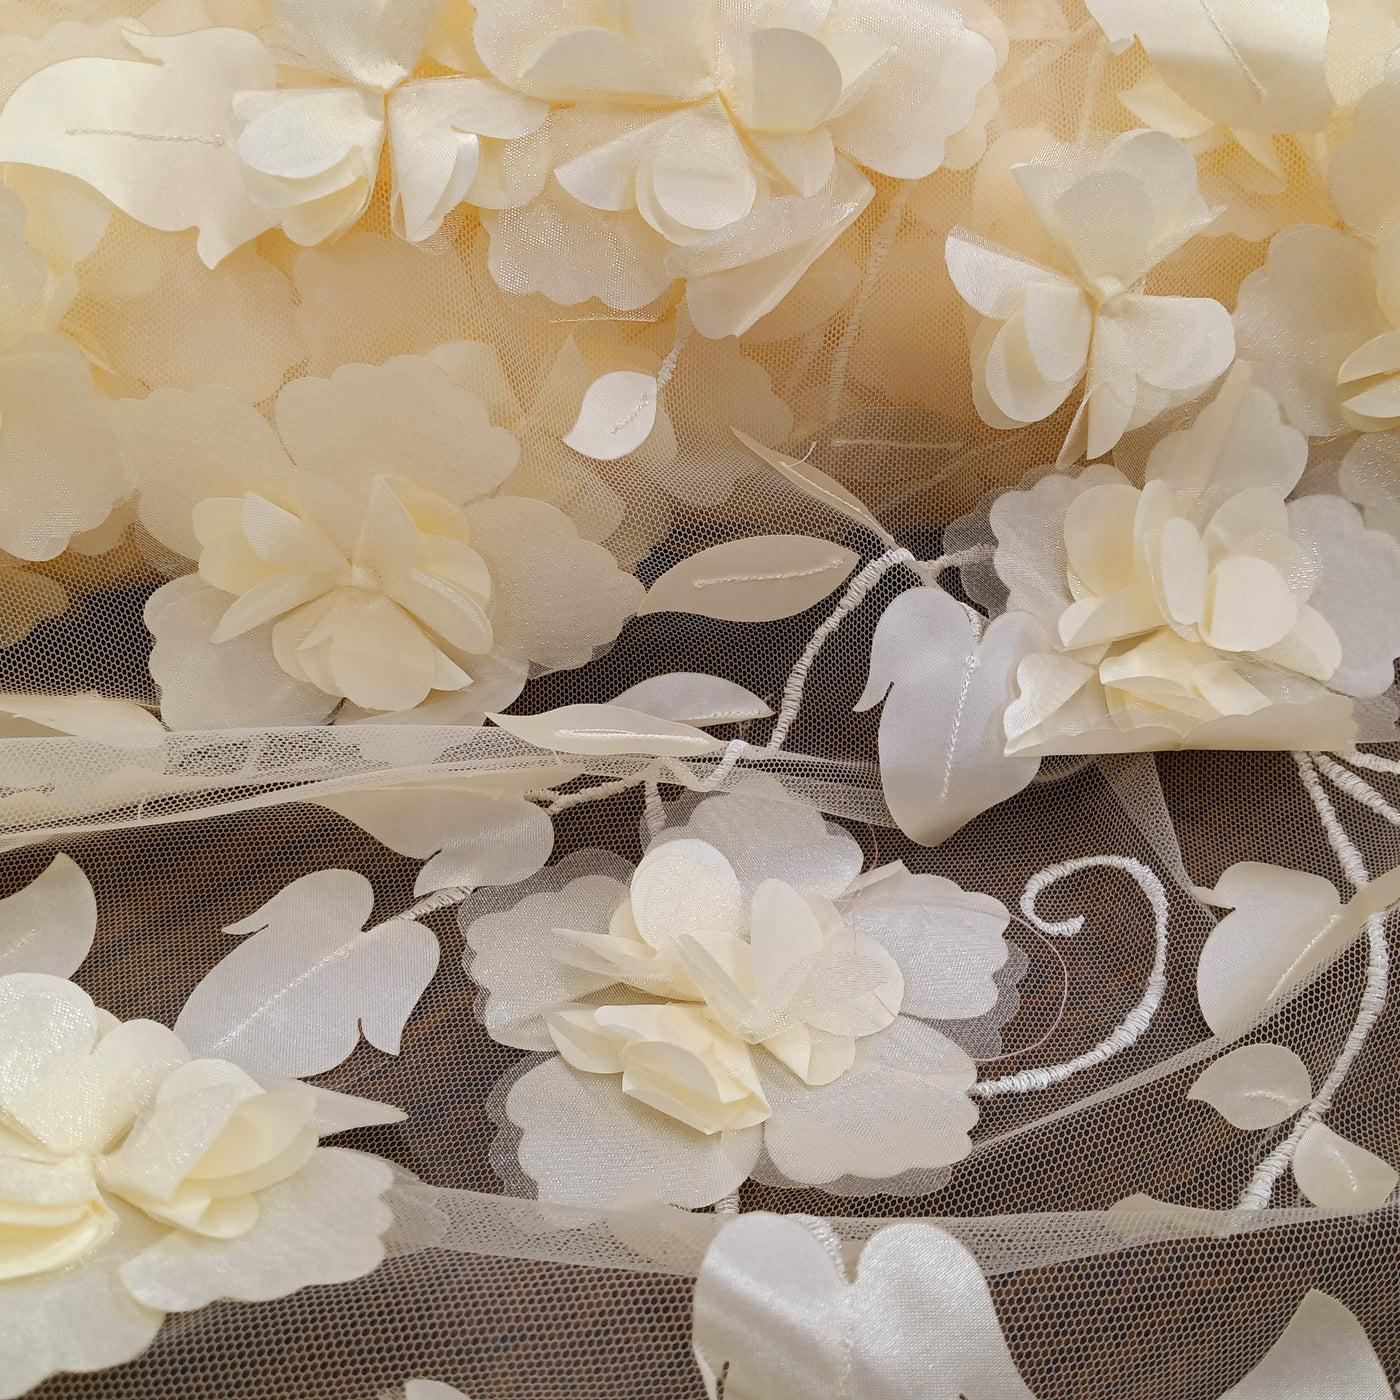 Delicate 3D Flowers Scattered on Embroidered Ivory Soft Tulle Net Fabric. Perfect Wedding Lace for Bridal Dresses or Quinceanera Dresses 54" Wide. Sold by the Yard. Lace Usa